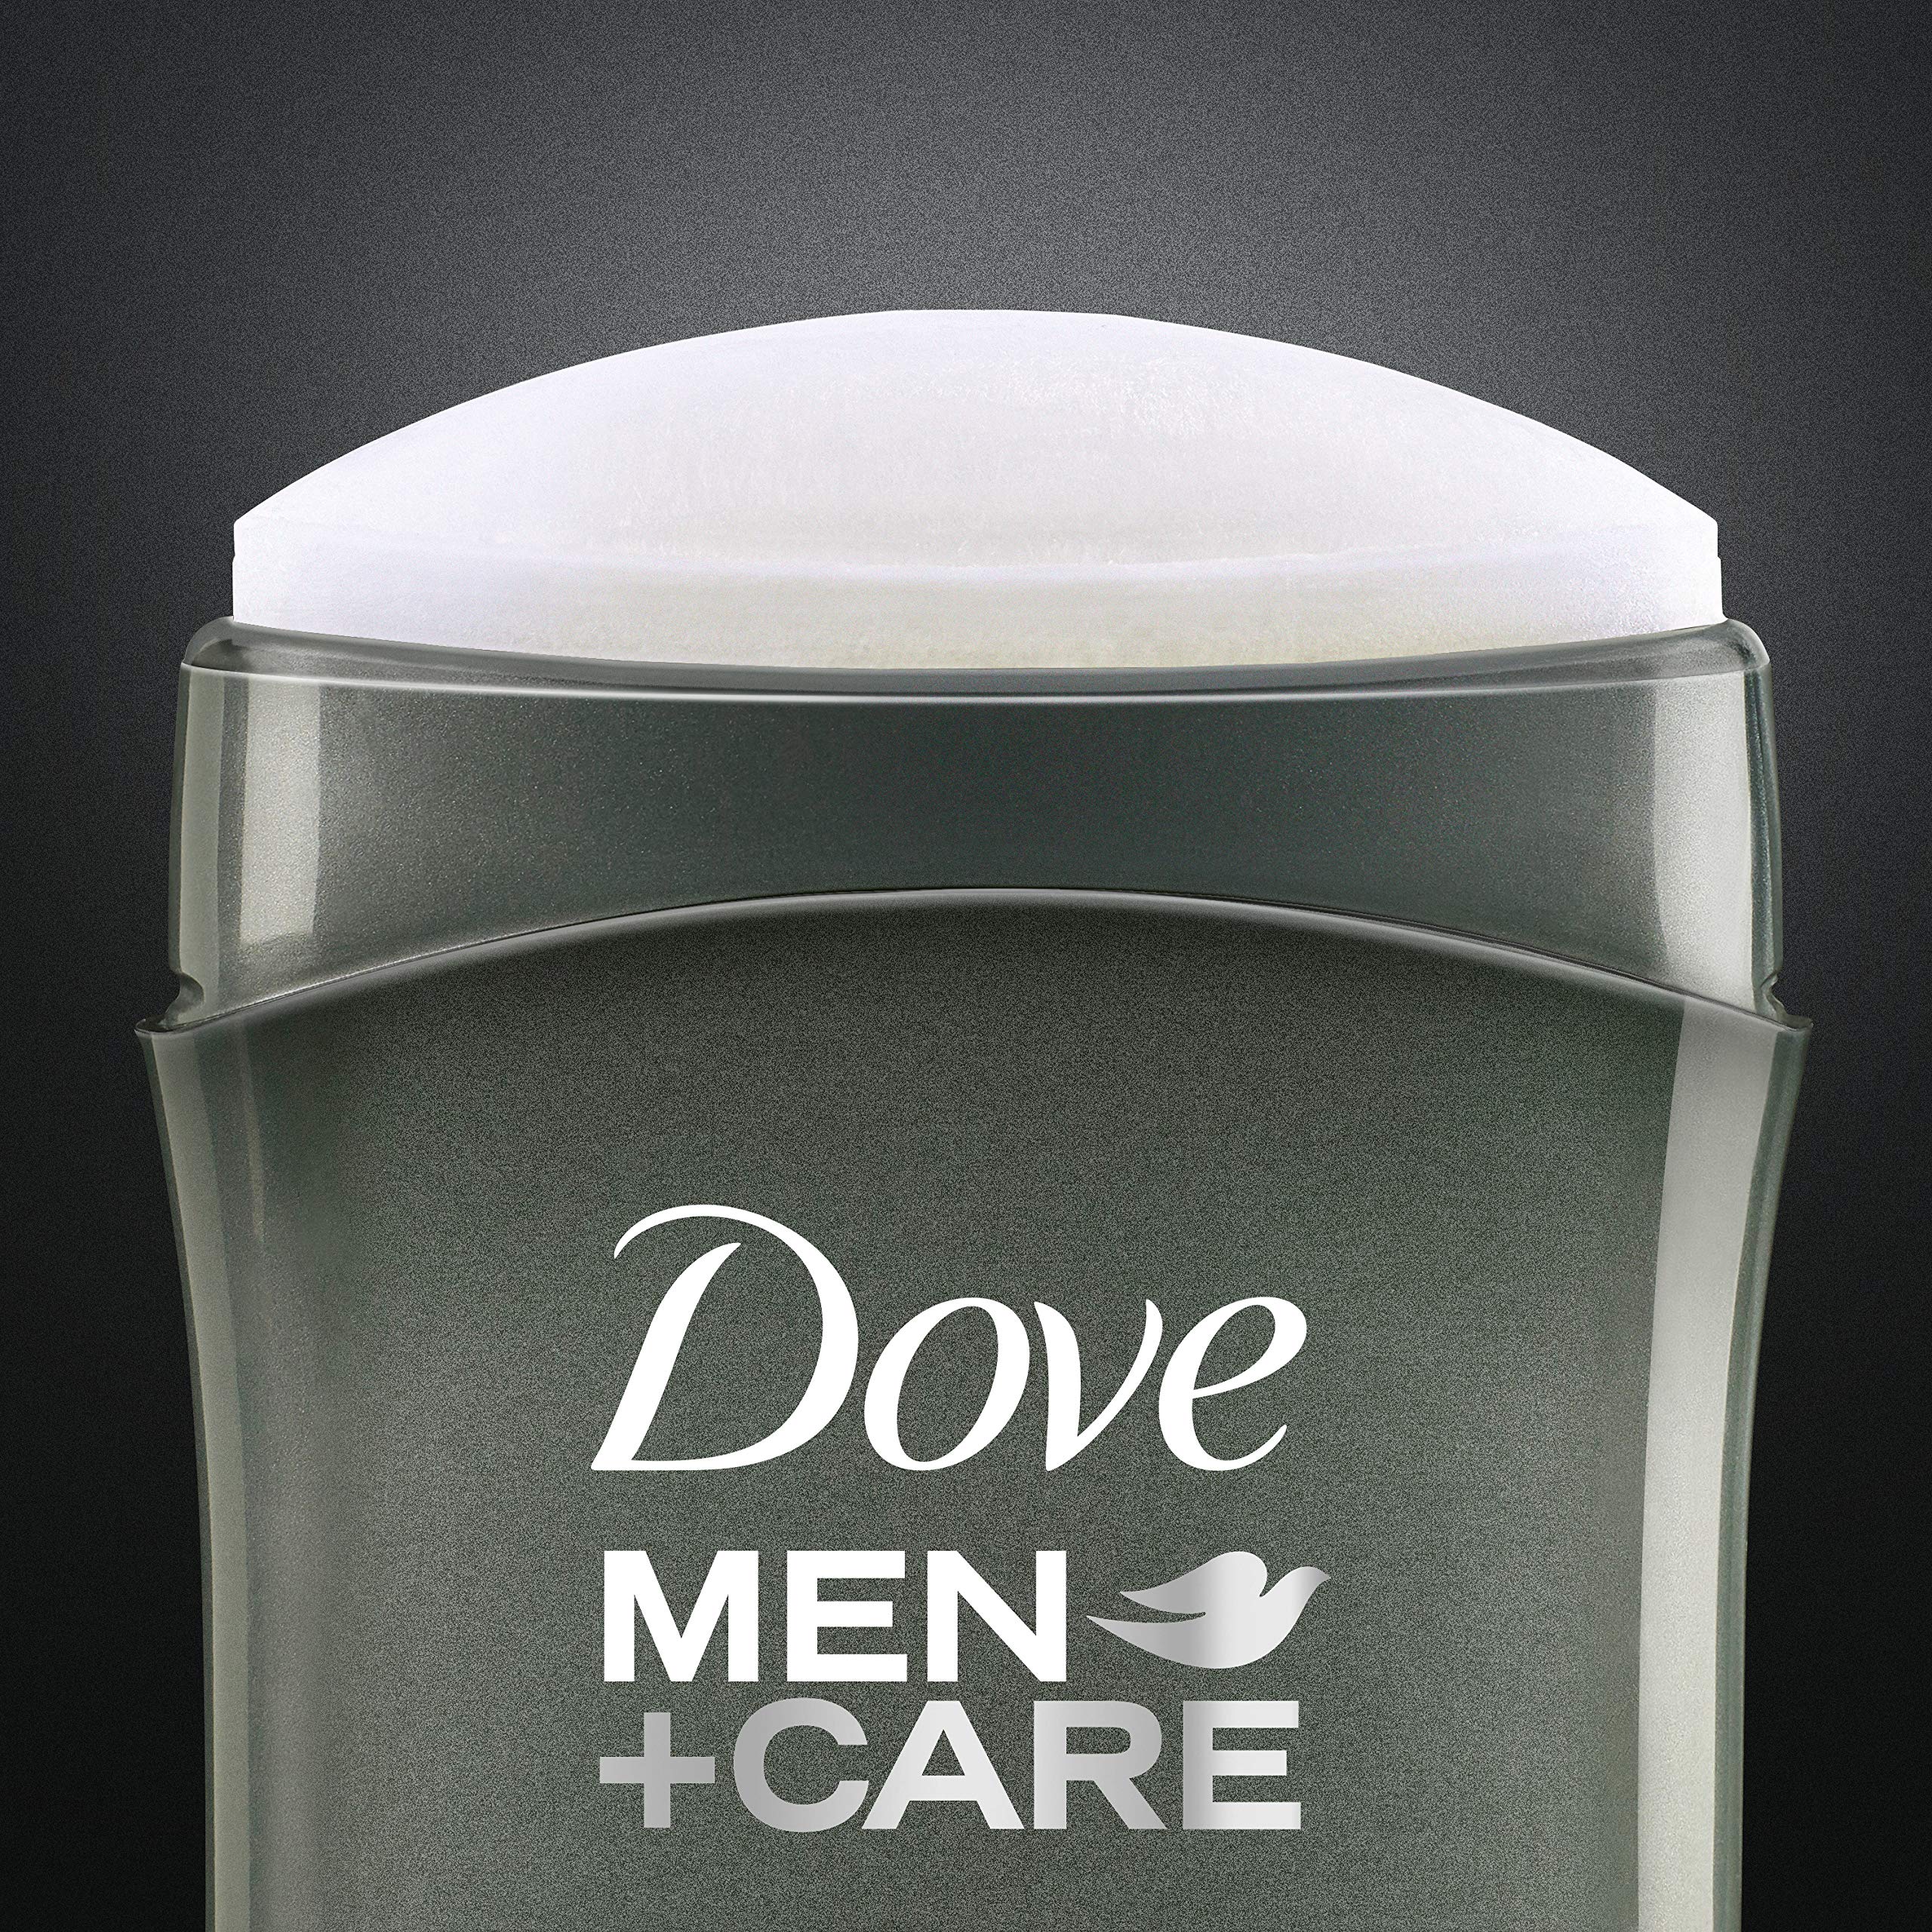 Dove Men+Care Deodorant Stick Aluminum-free formula with 48-Hour Protection Extra Fresh Deodorant for men with Vitamin E and Triple Action Moisturizer 3 oz